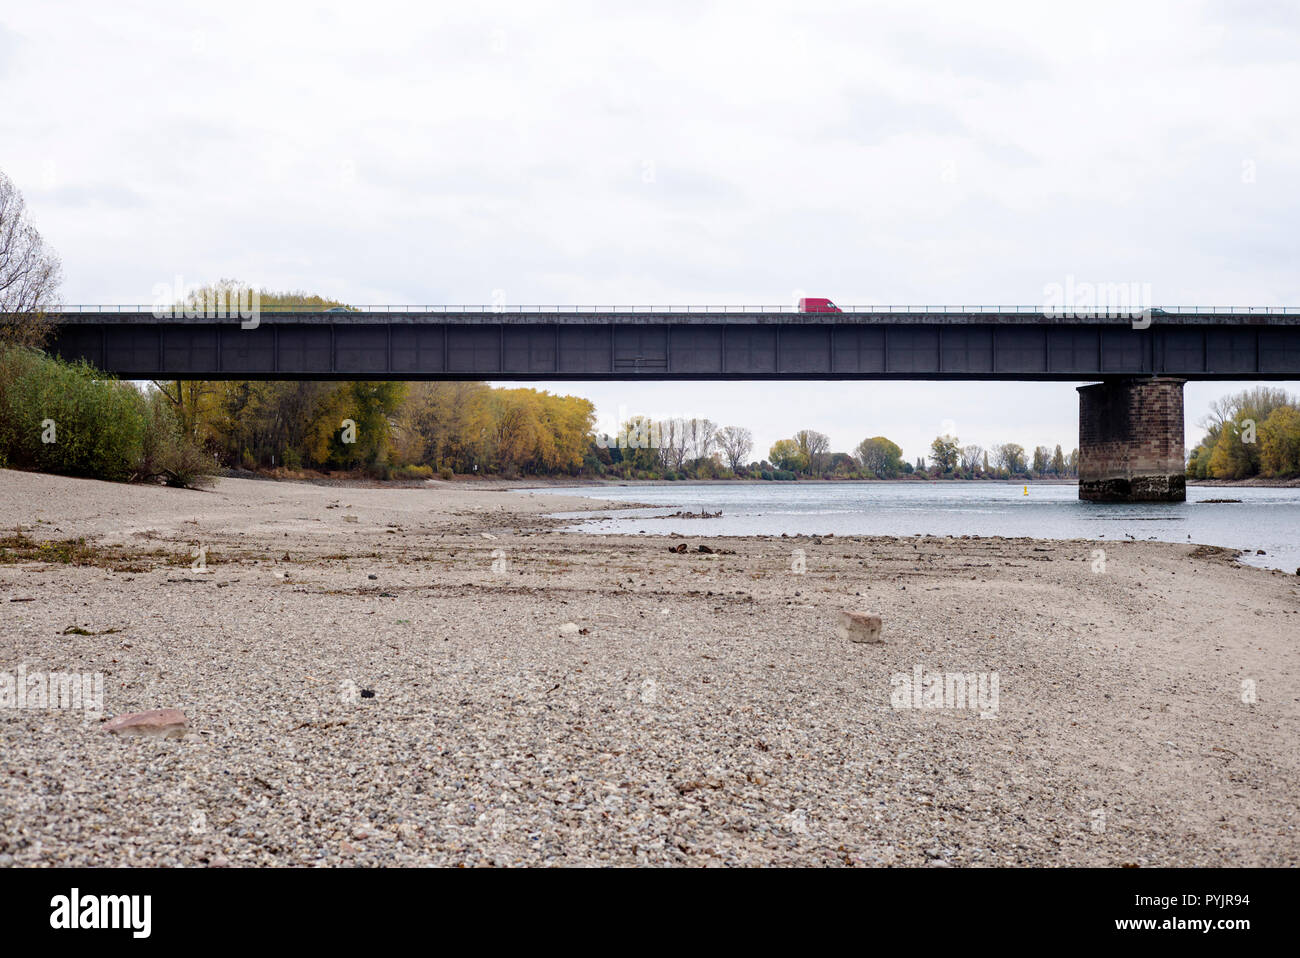 The Rhine River between Ludwigshafen and Mannheim, Germany, 28 October 2018. A dry summer and an ongoing drought have brought the river to historic low levels, causing a serious impediment for commercial shipping on the river. Credit: Philipp Zechner/Alamy Live News Stock Photo